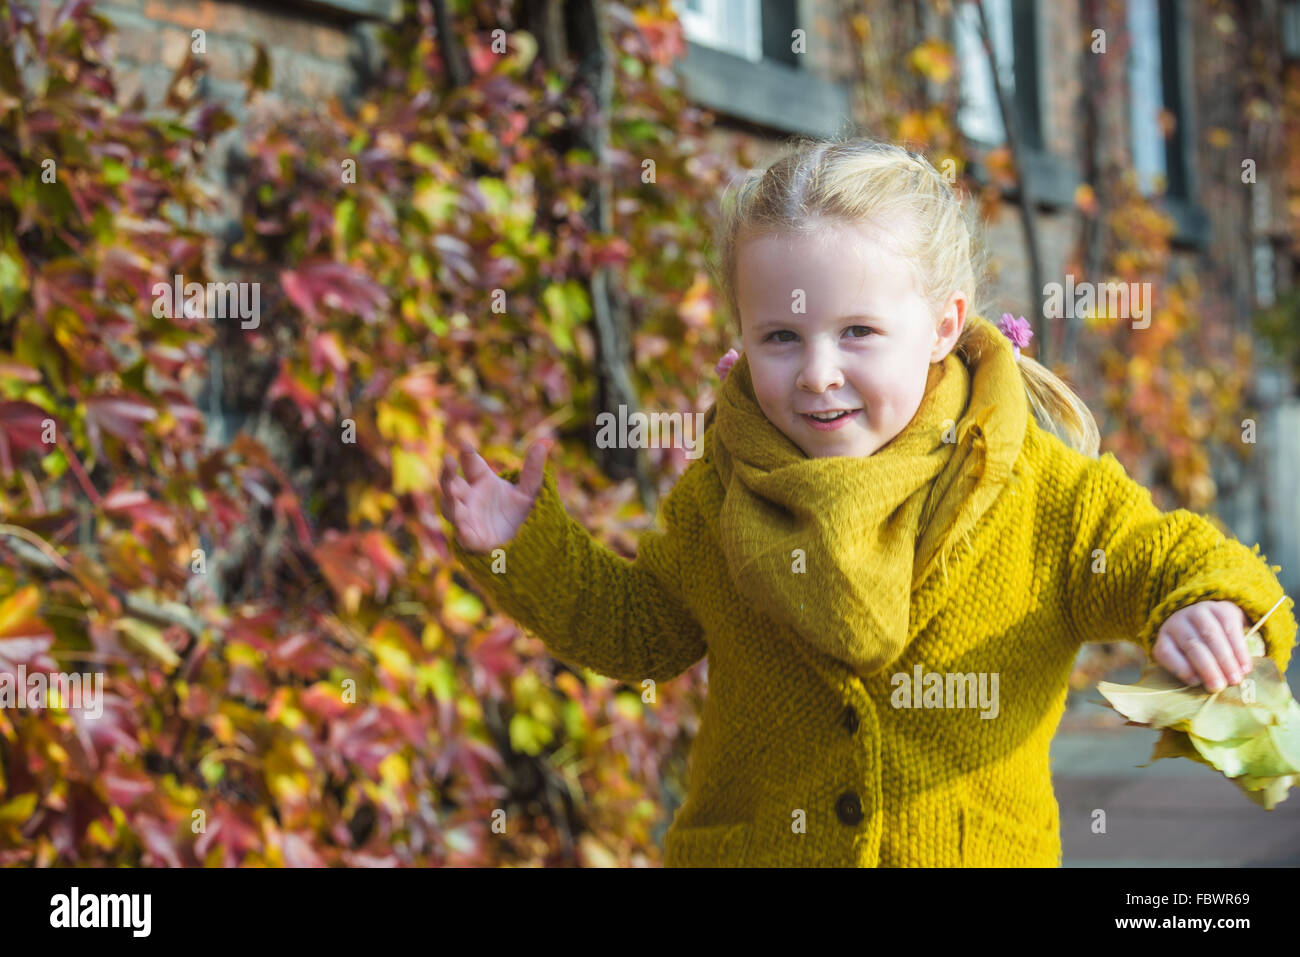 Autumn leaves as a background for a portrait for a little girl. Stock Photo